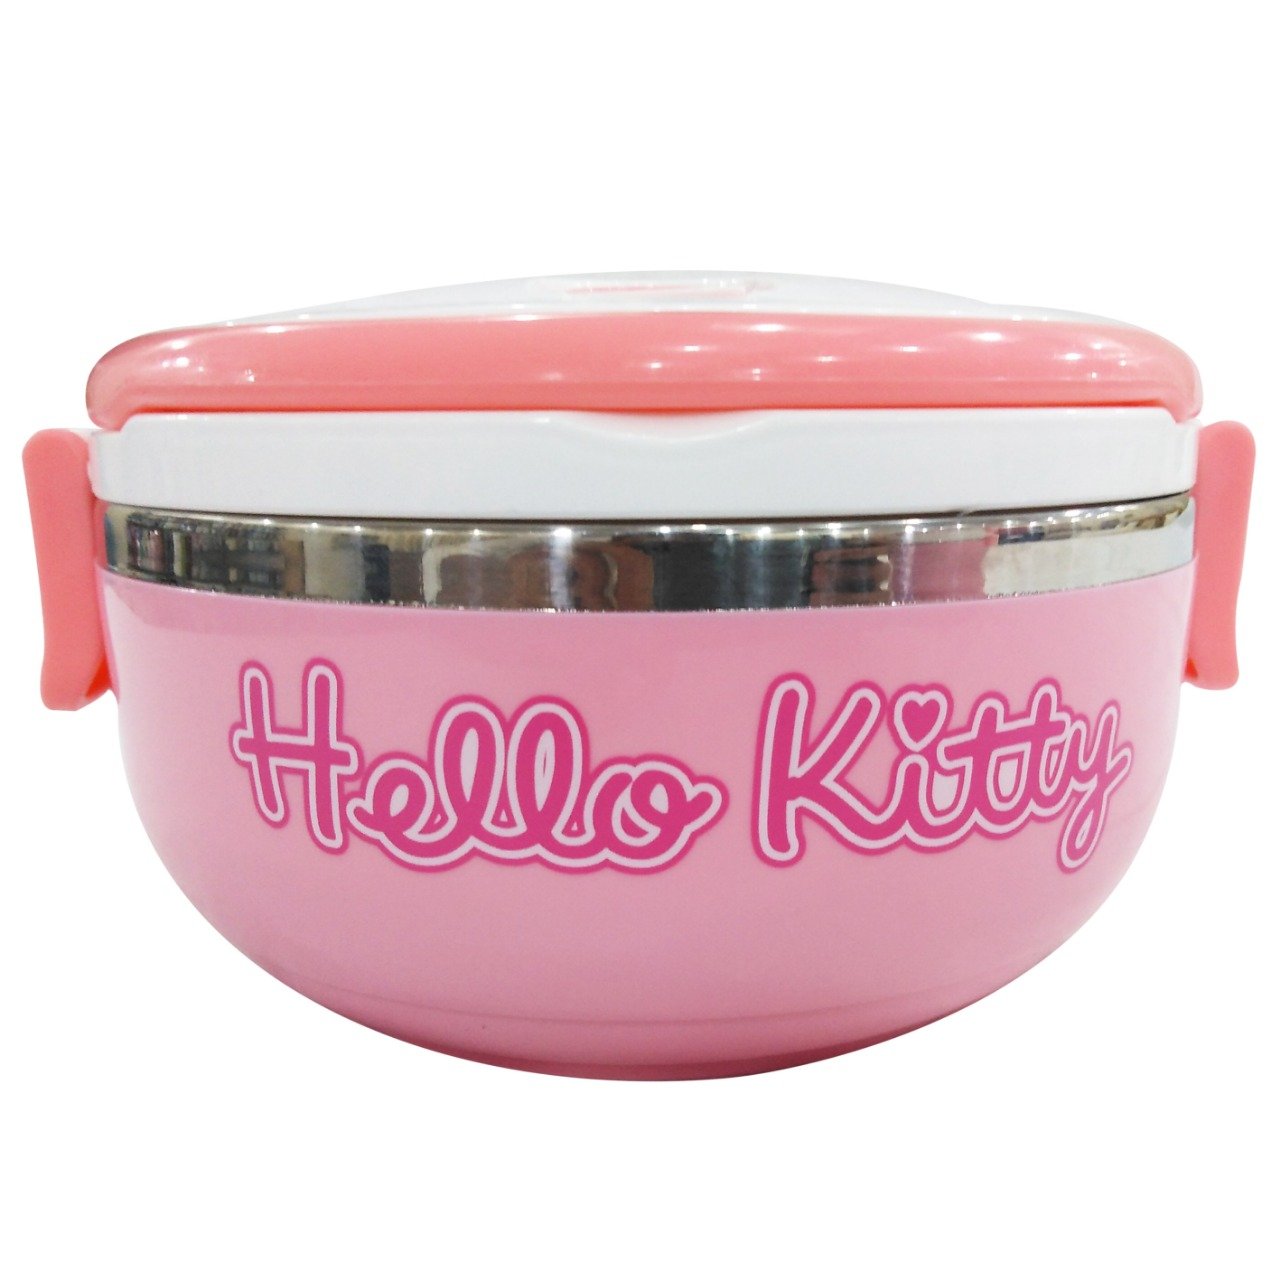 Hello Kitty - Stainless Steel Lunch Box - waseeh.com